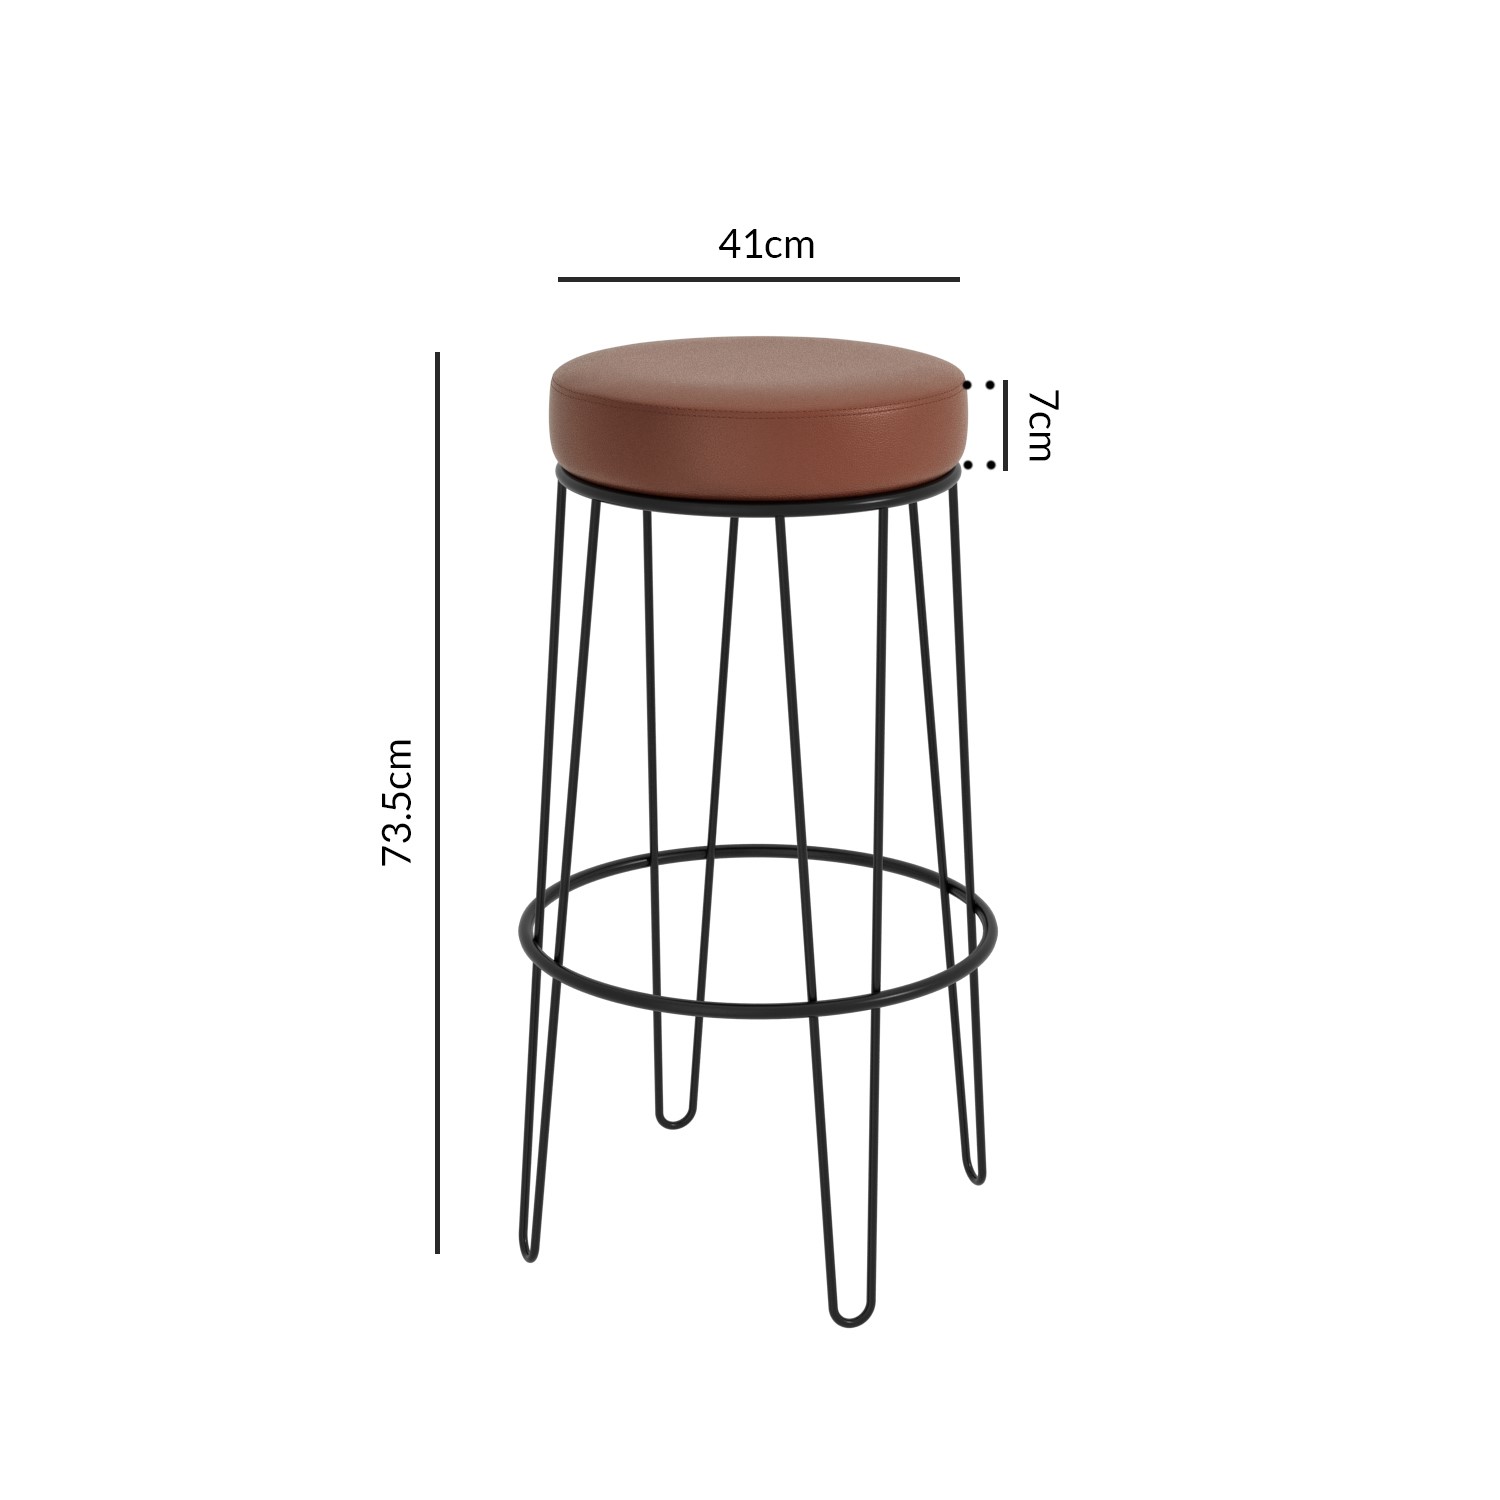 Pair of Tan Faux Leather Bar Stools with Hairpin Legs Tara 